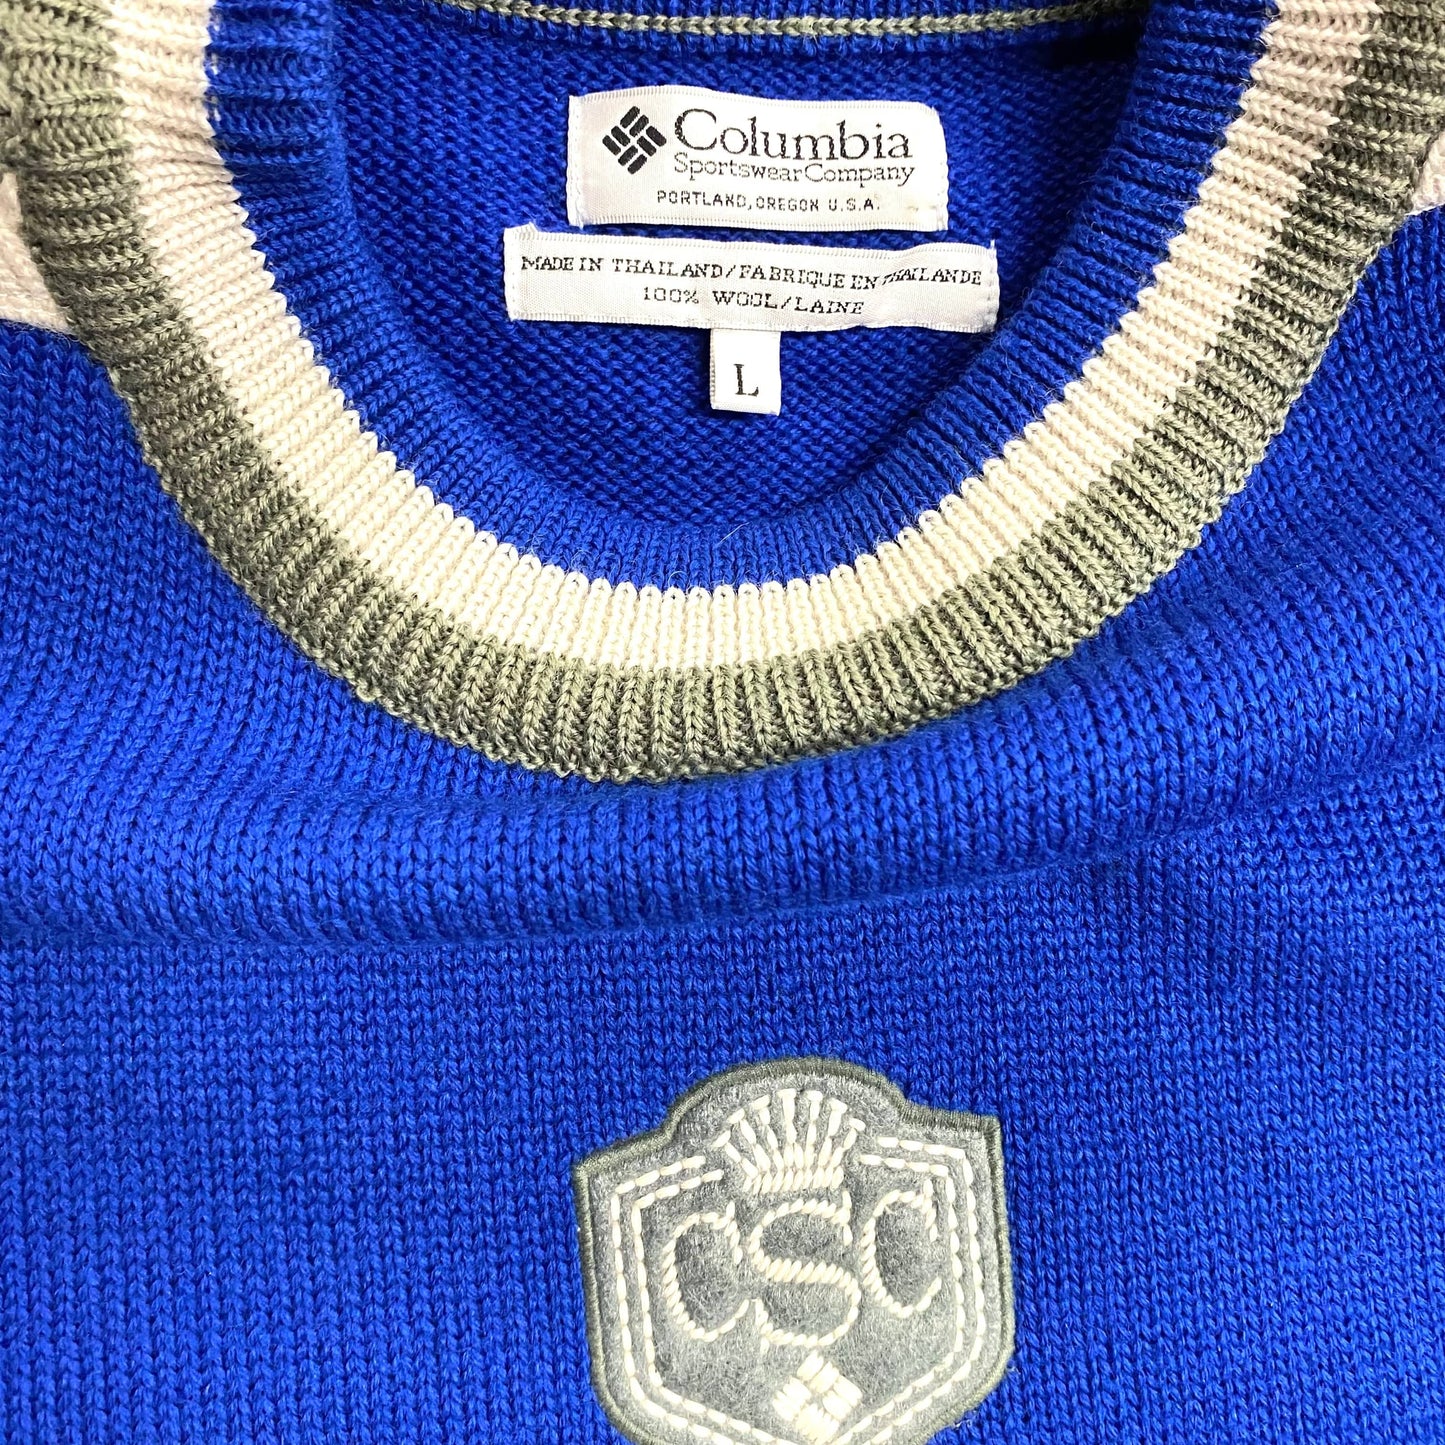 Vintage Columbia Mens Wool Sweater Size L Blue/Gray/White Emroidered Logo Crew Neck L/s